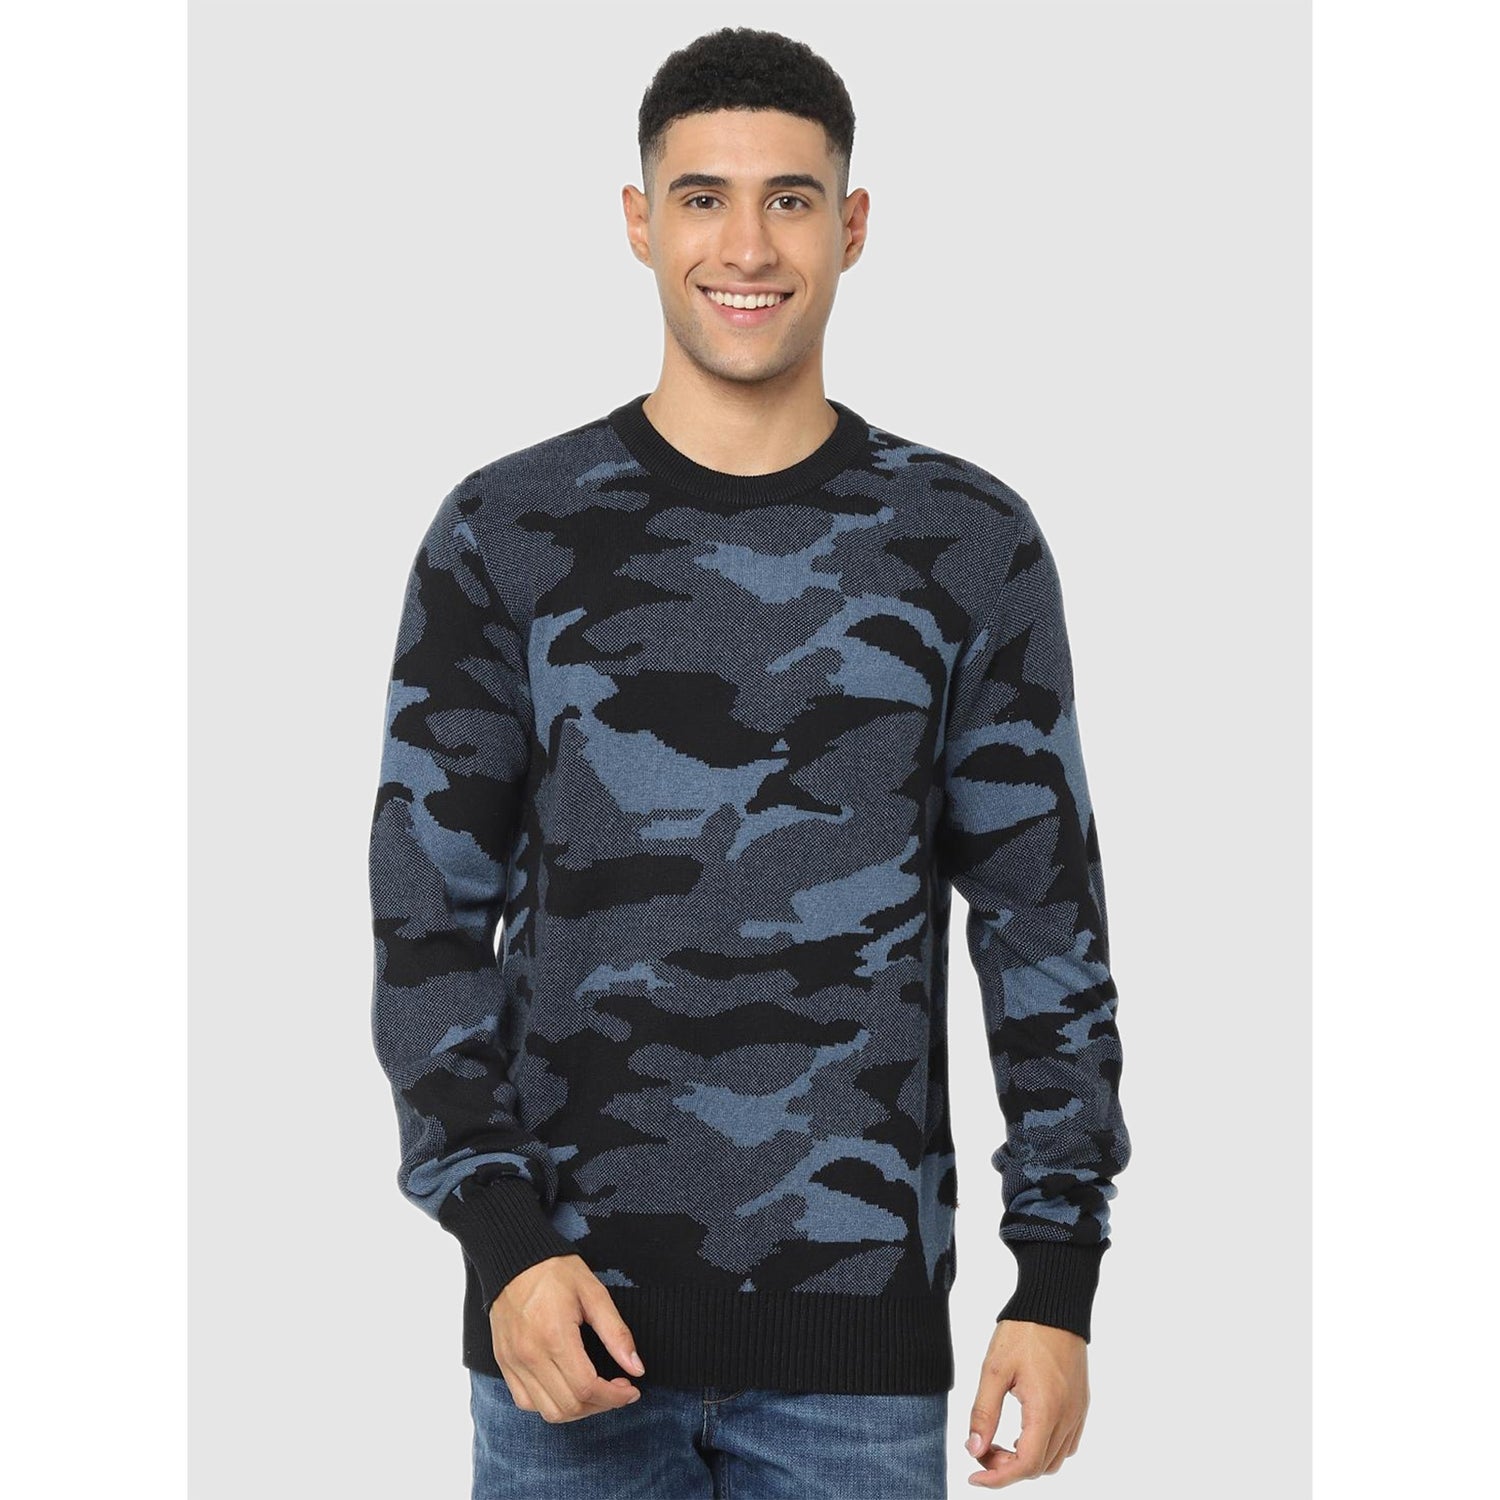 Navy Camouflage Regular Fit Sweater (Various Sizes)